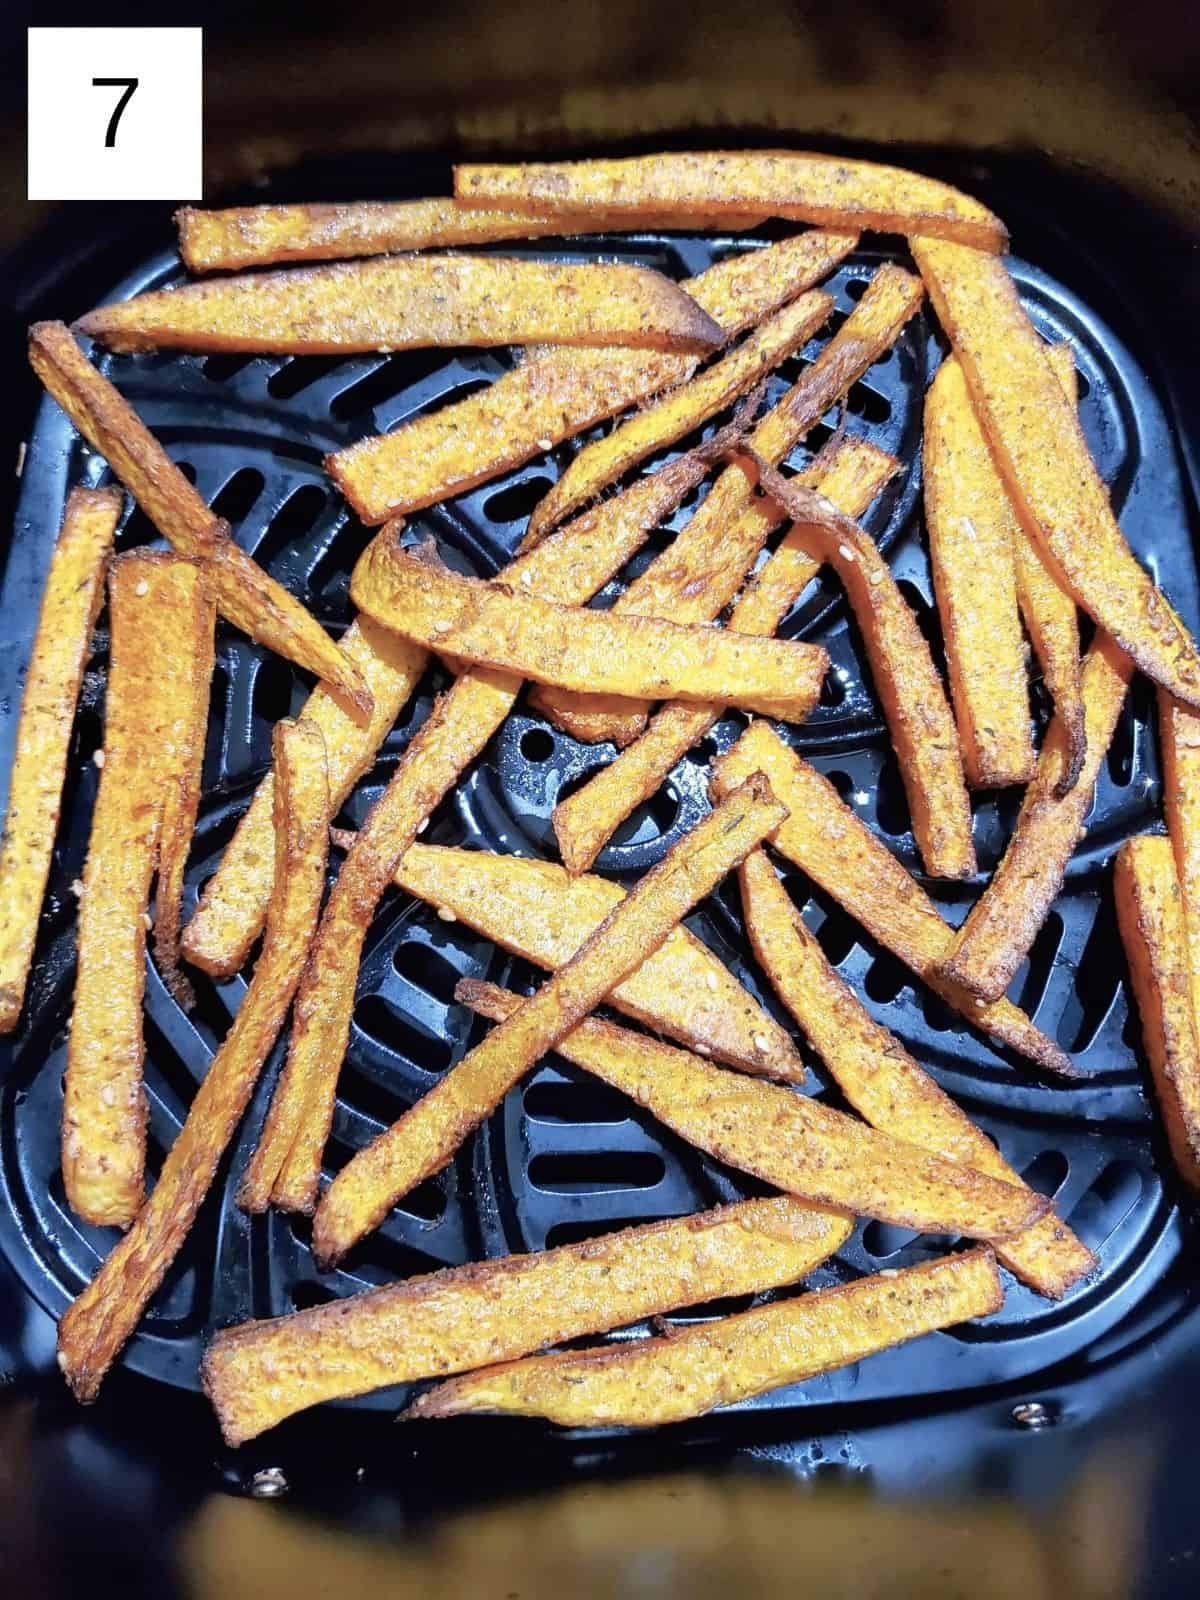 cooked butternut squash slices in an air fryer.